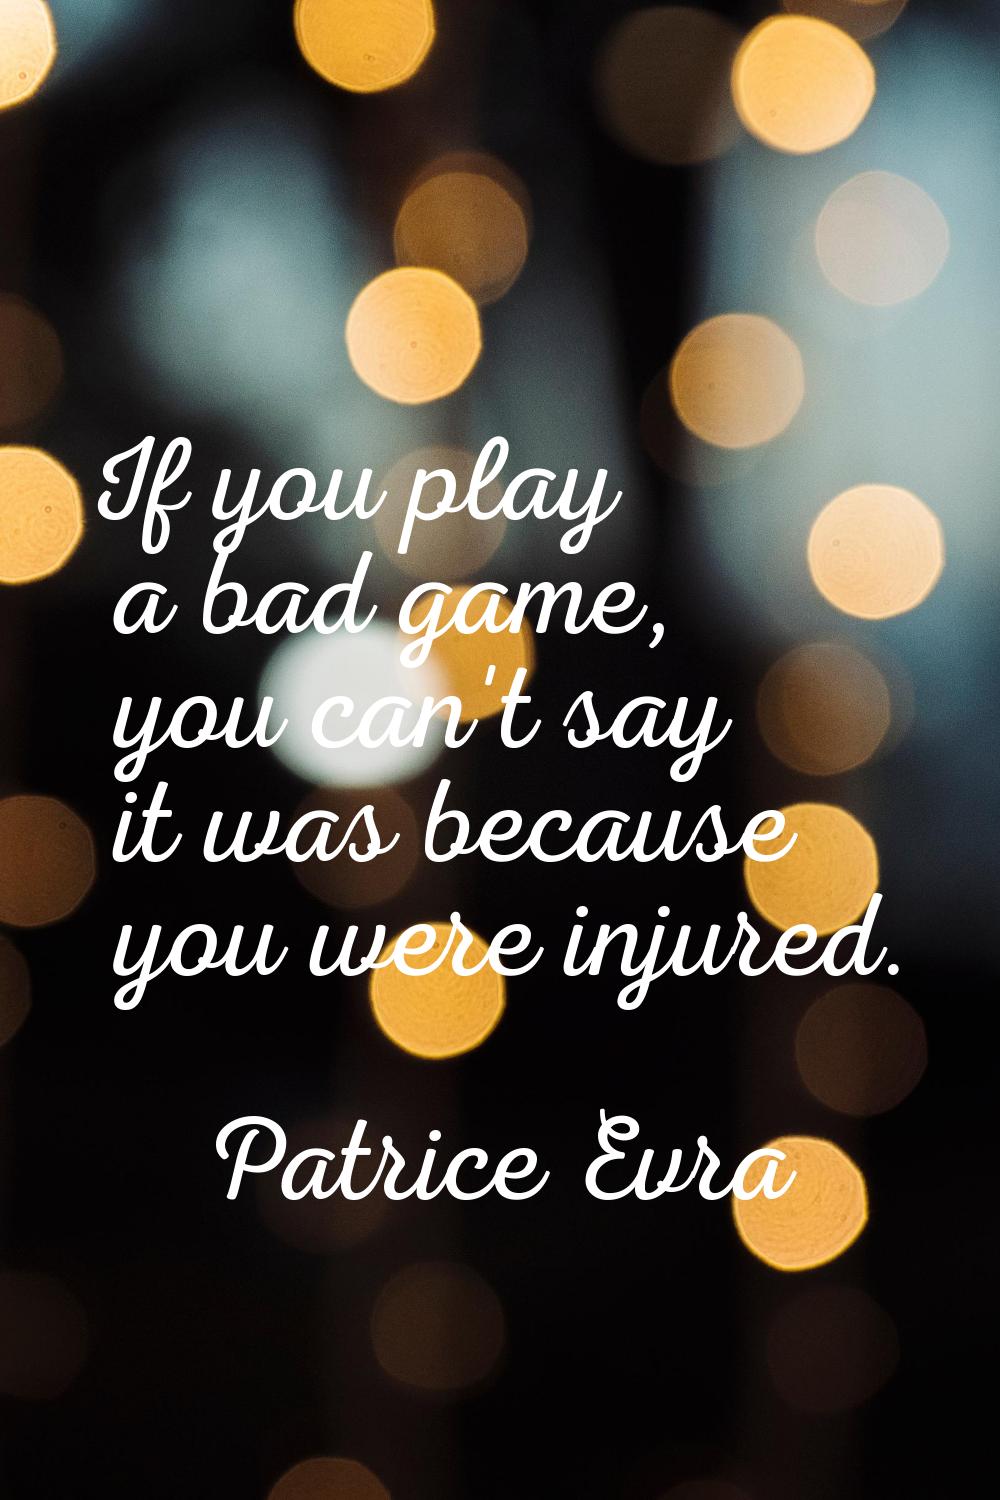 If you play a bad game, you can't say it was because you were injured.